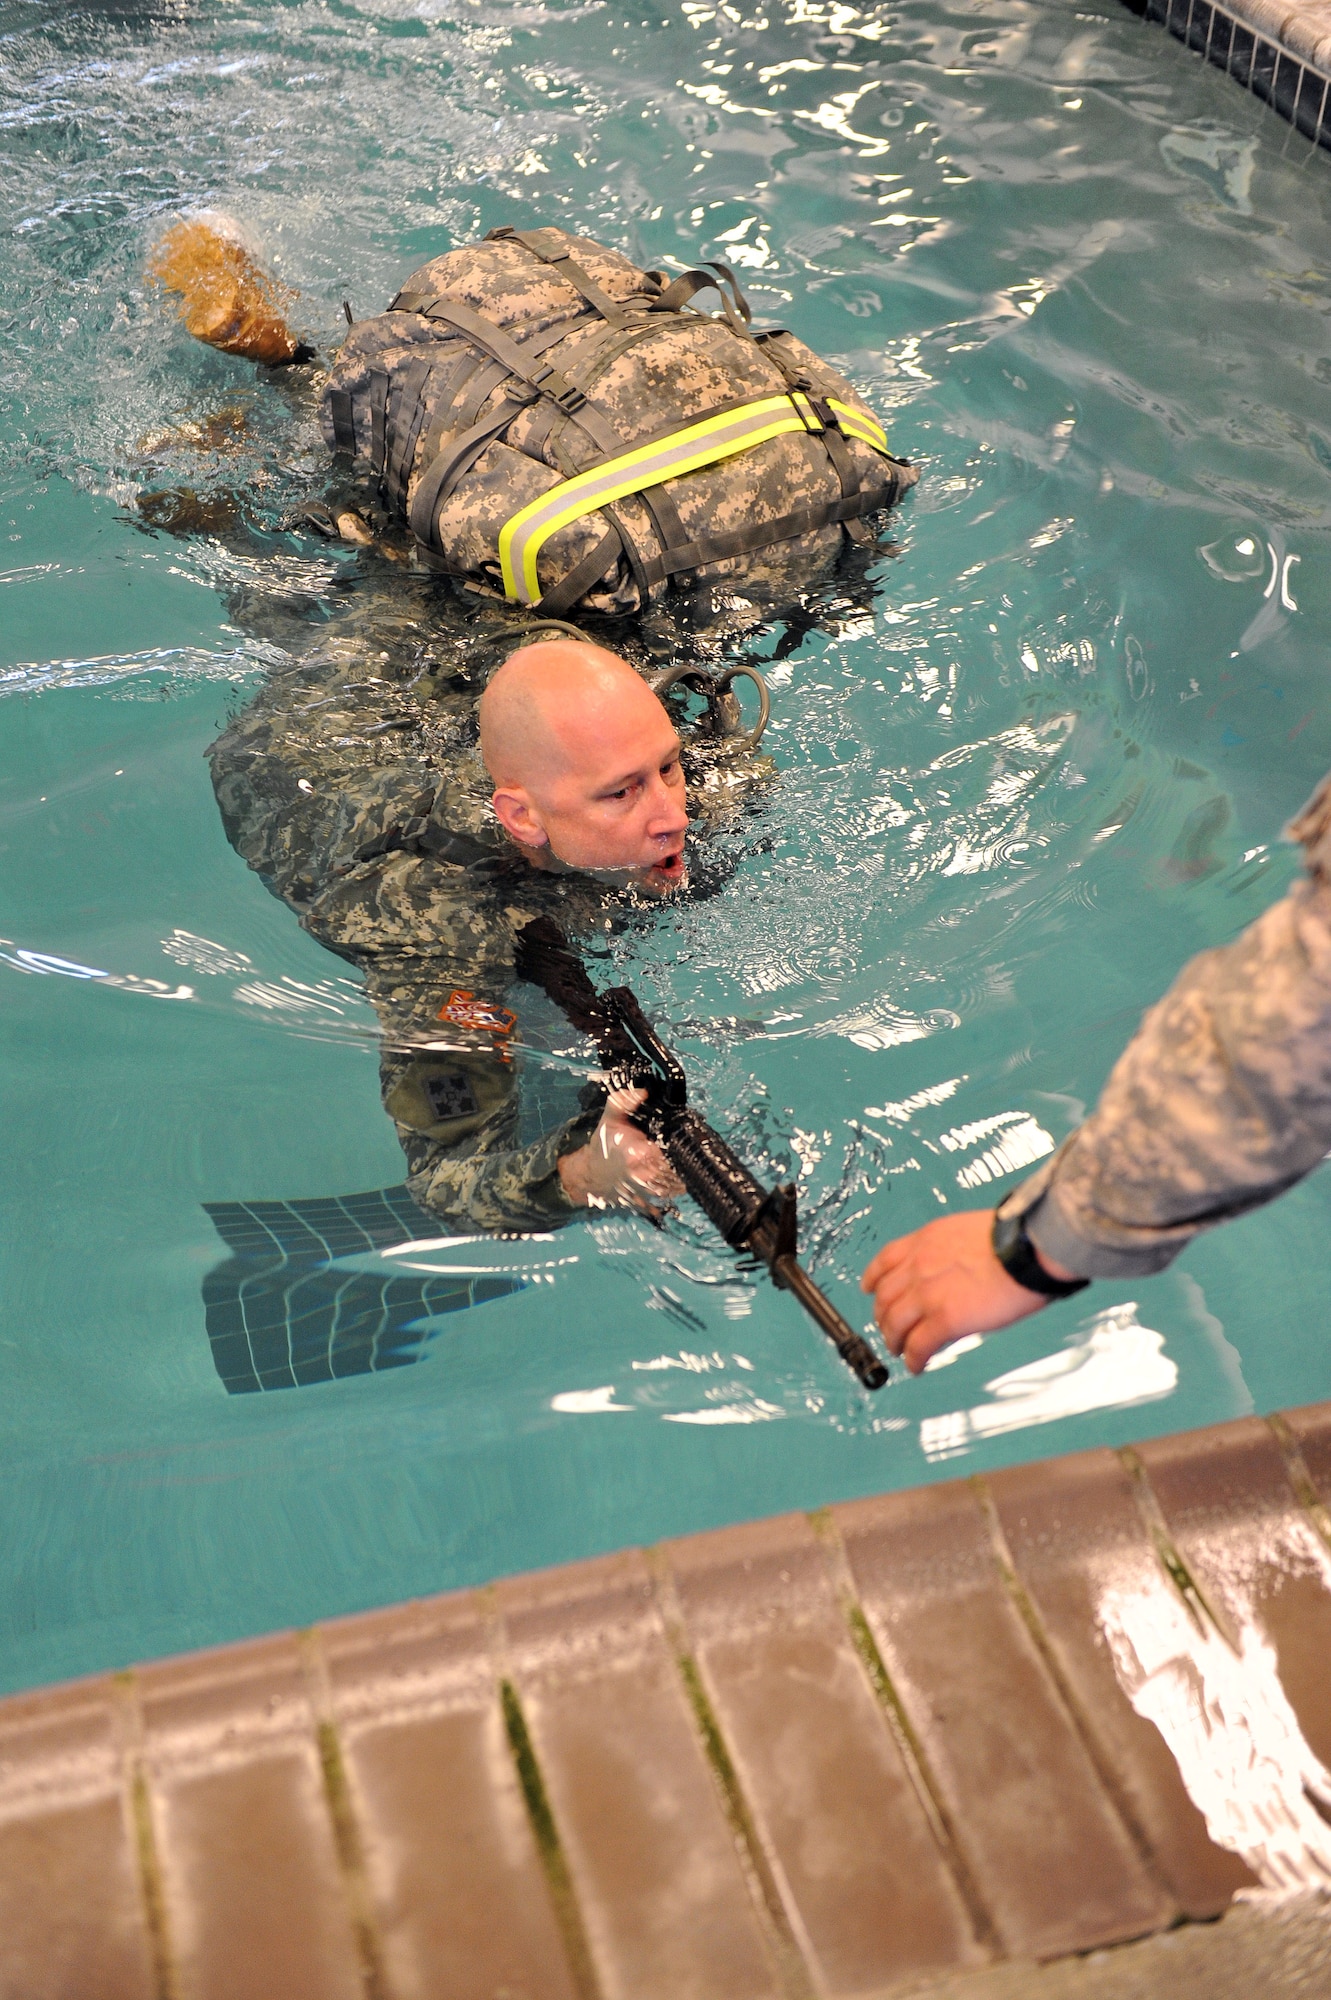 Maj. Will Vogan, Deputy Mission Crew commander, swims with a rubber M-4 firearm and a rucksack during water survival training. (U.S. Air Force photo by Tommie Horton)